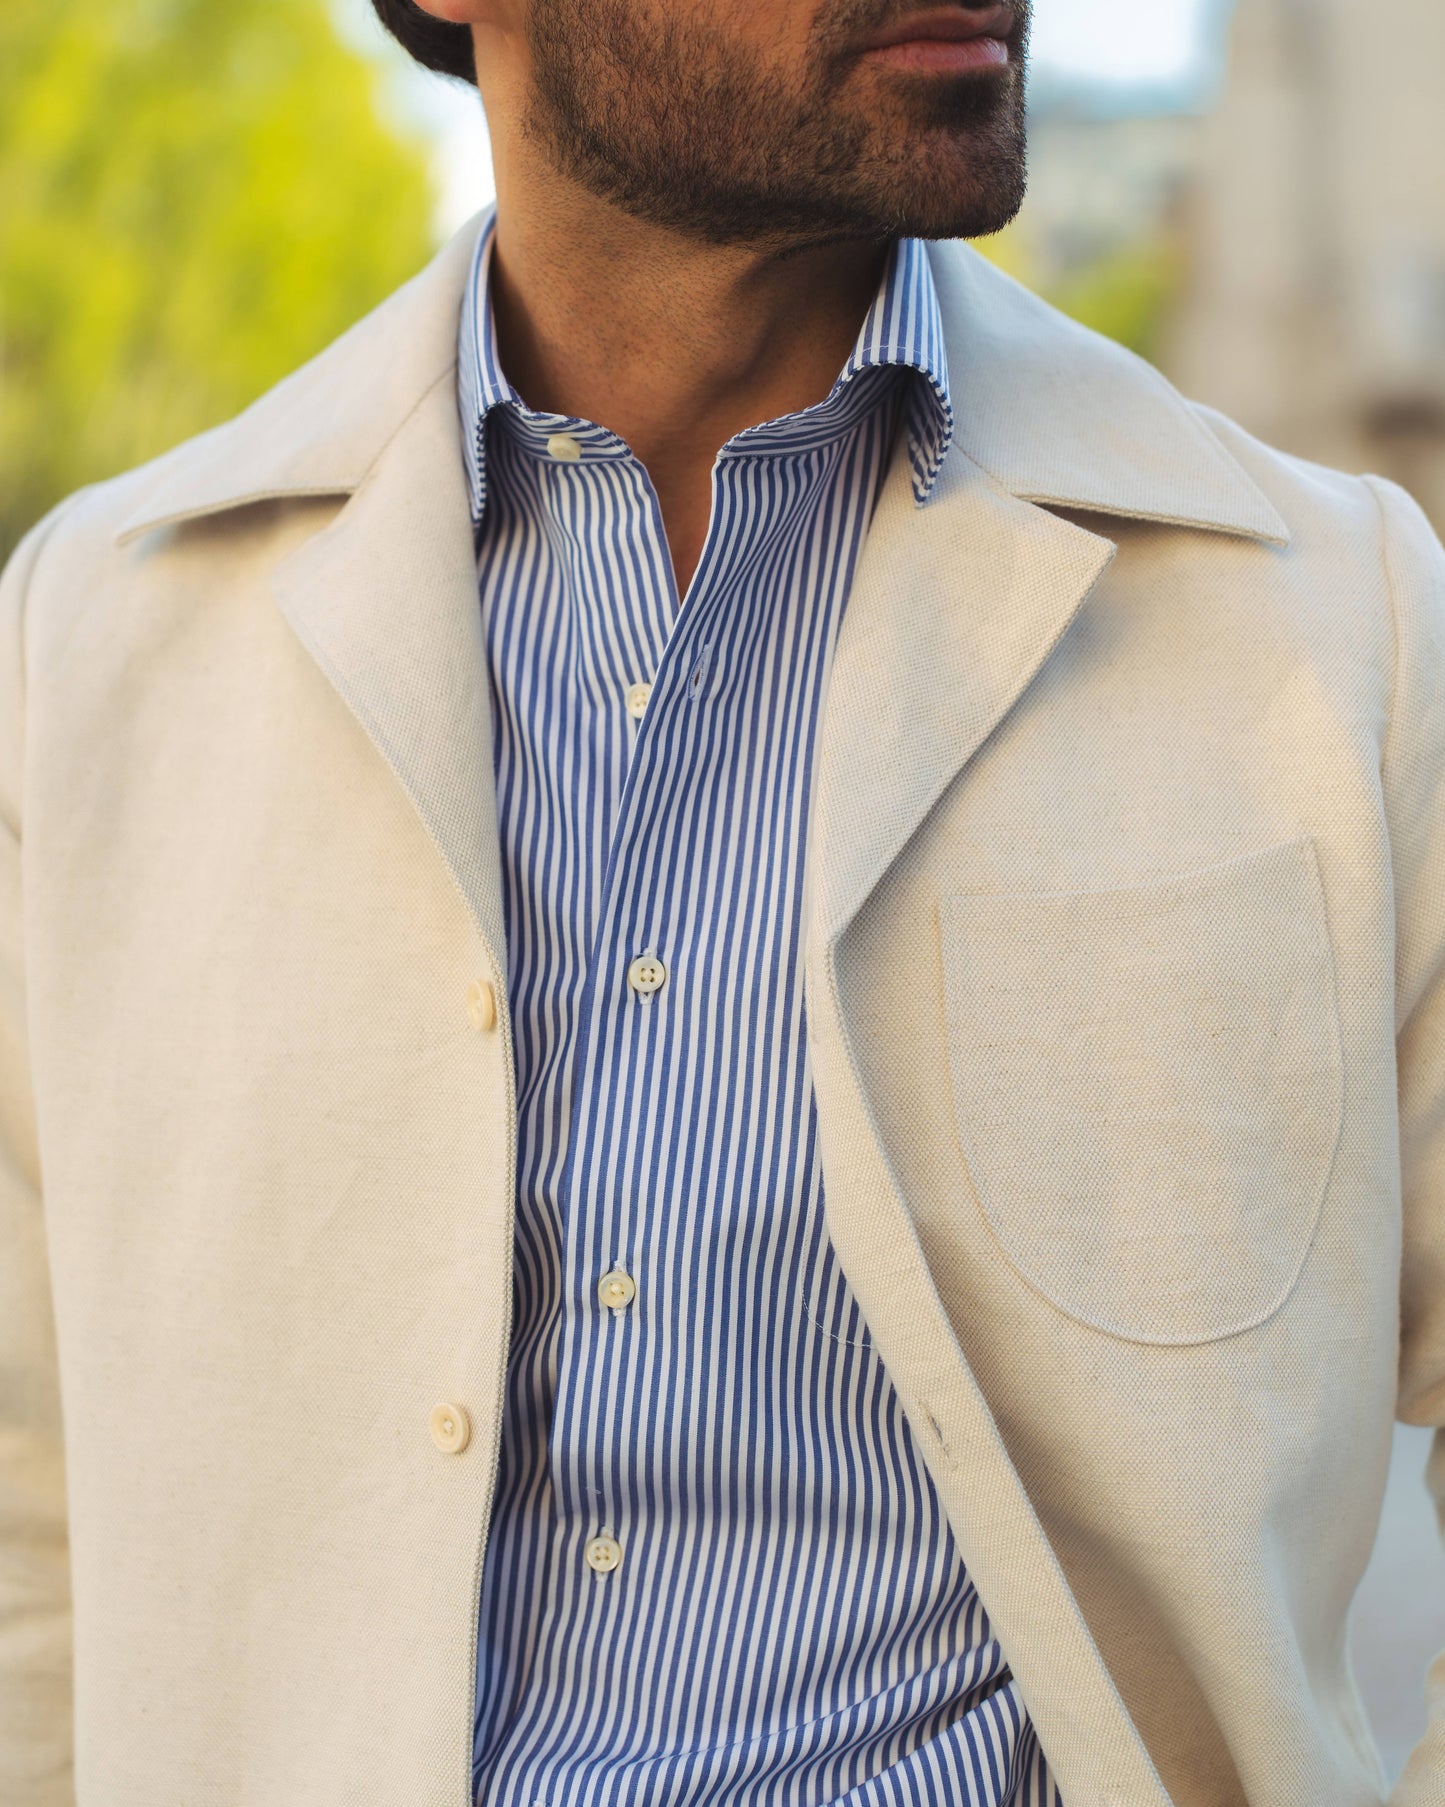 Model outside wearing the linen shirt jacket for men by Luxire in cream wearing striped shirt